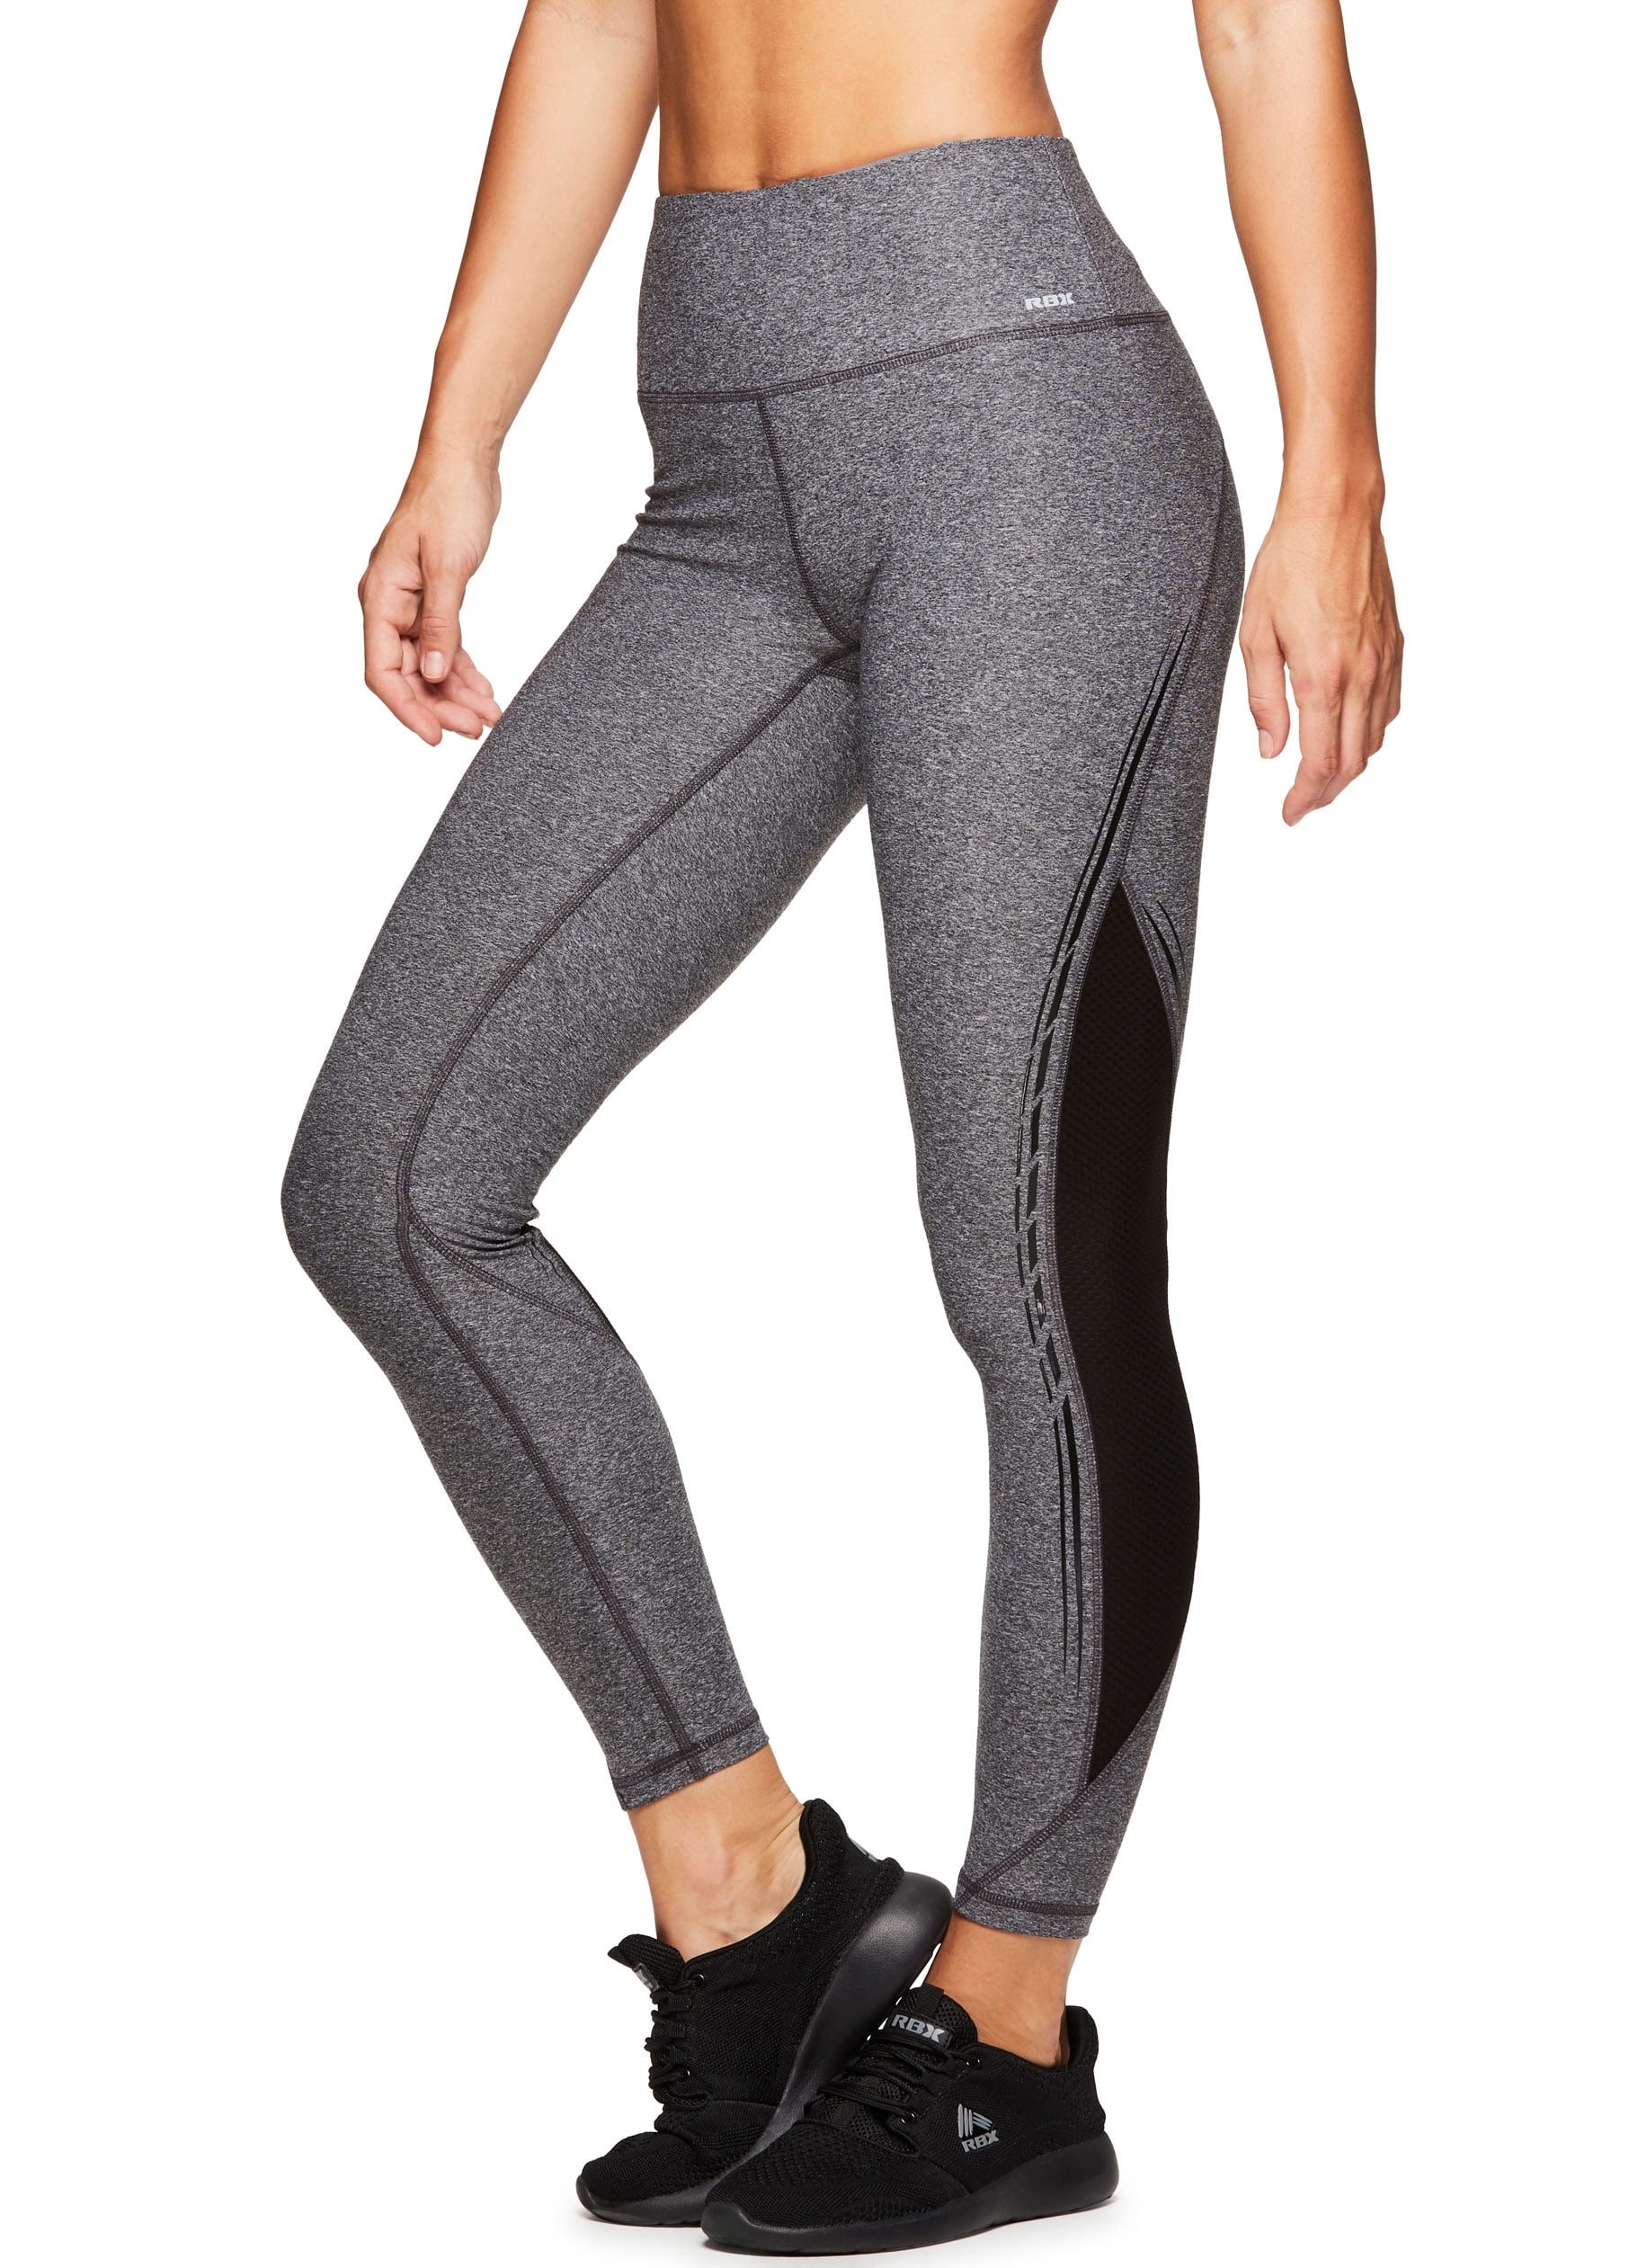 Rbx Active Leggings Reviews  International Society of Precision